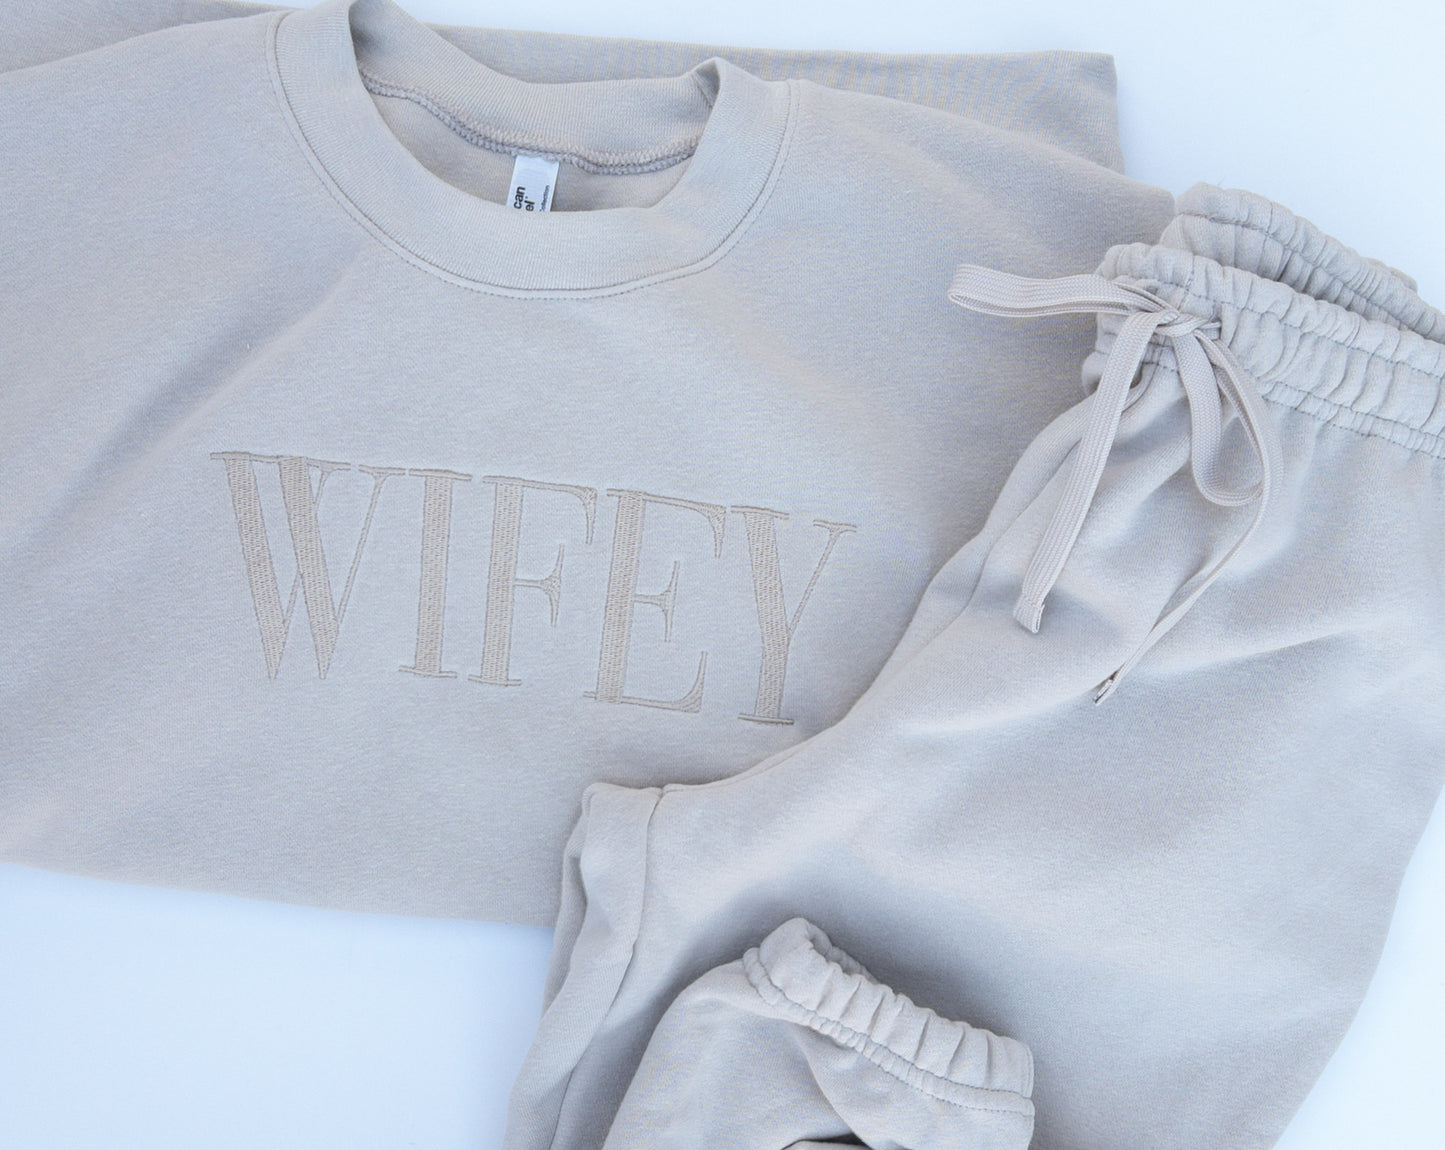 Wifey Embroidered Sweat Set